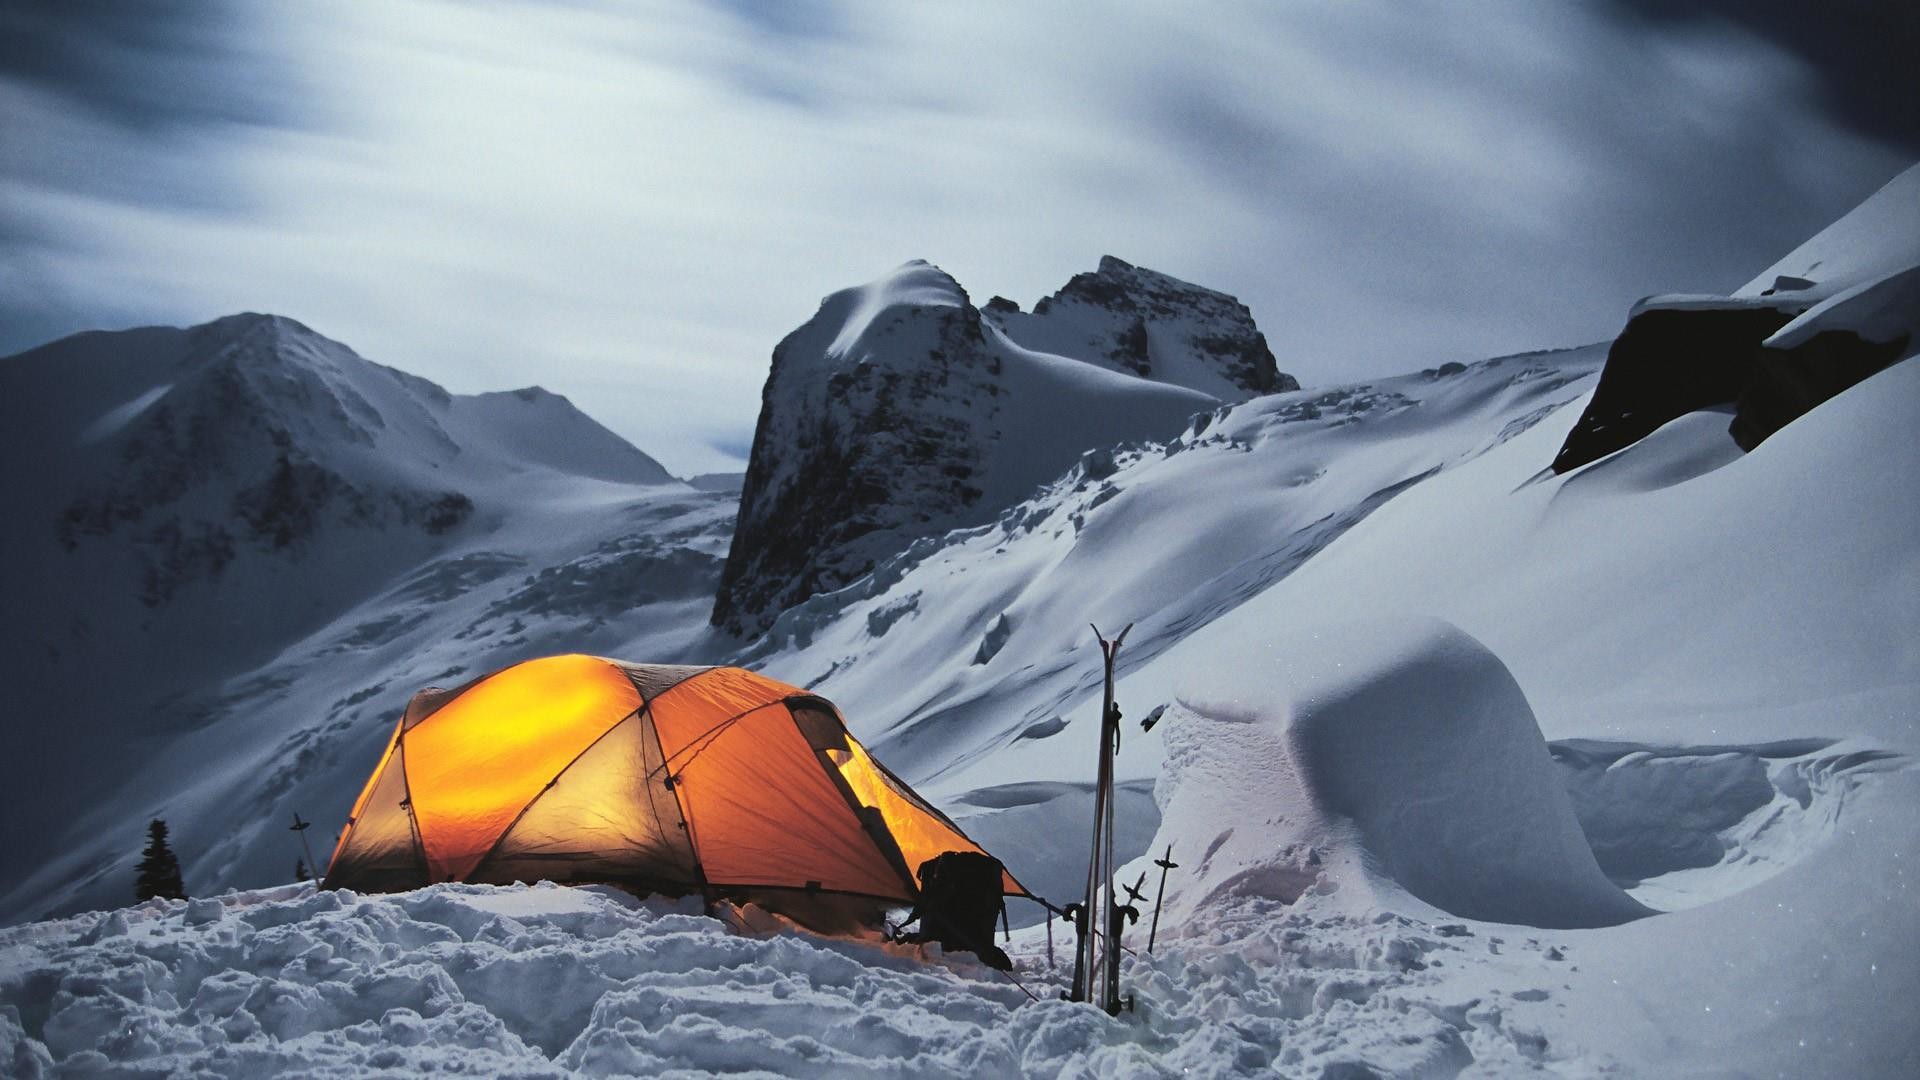 1920x1080, Camping In The Snow Wallpaper - Mountain Camping - HD Wallpaper 